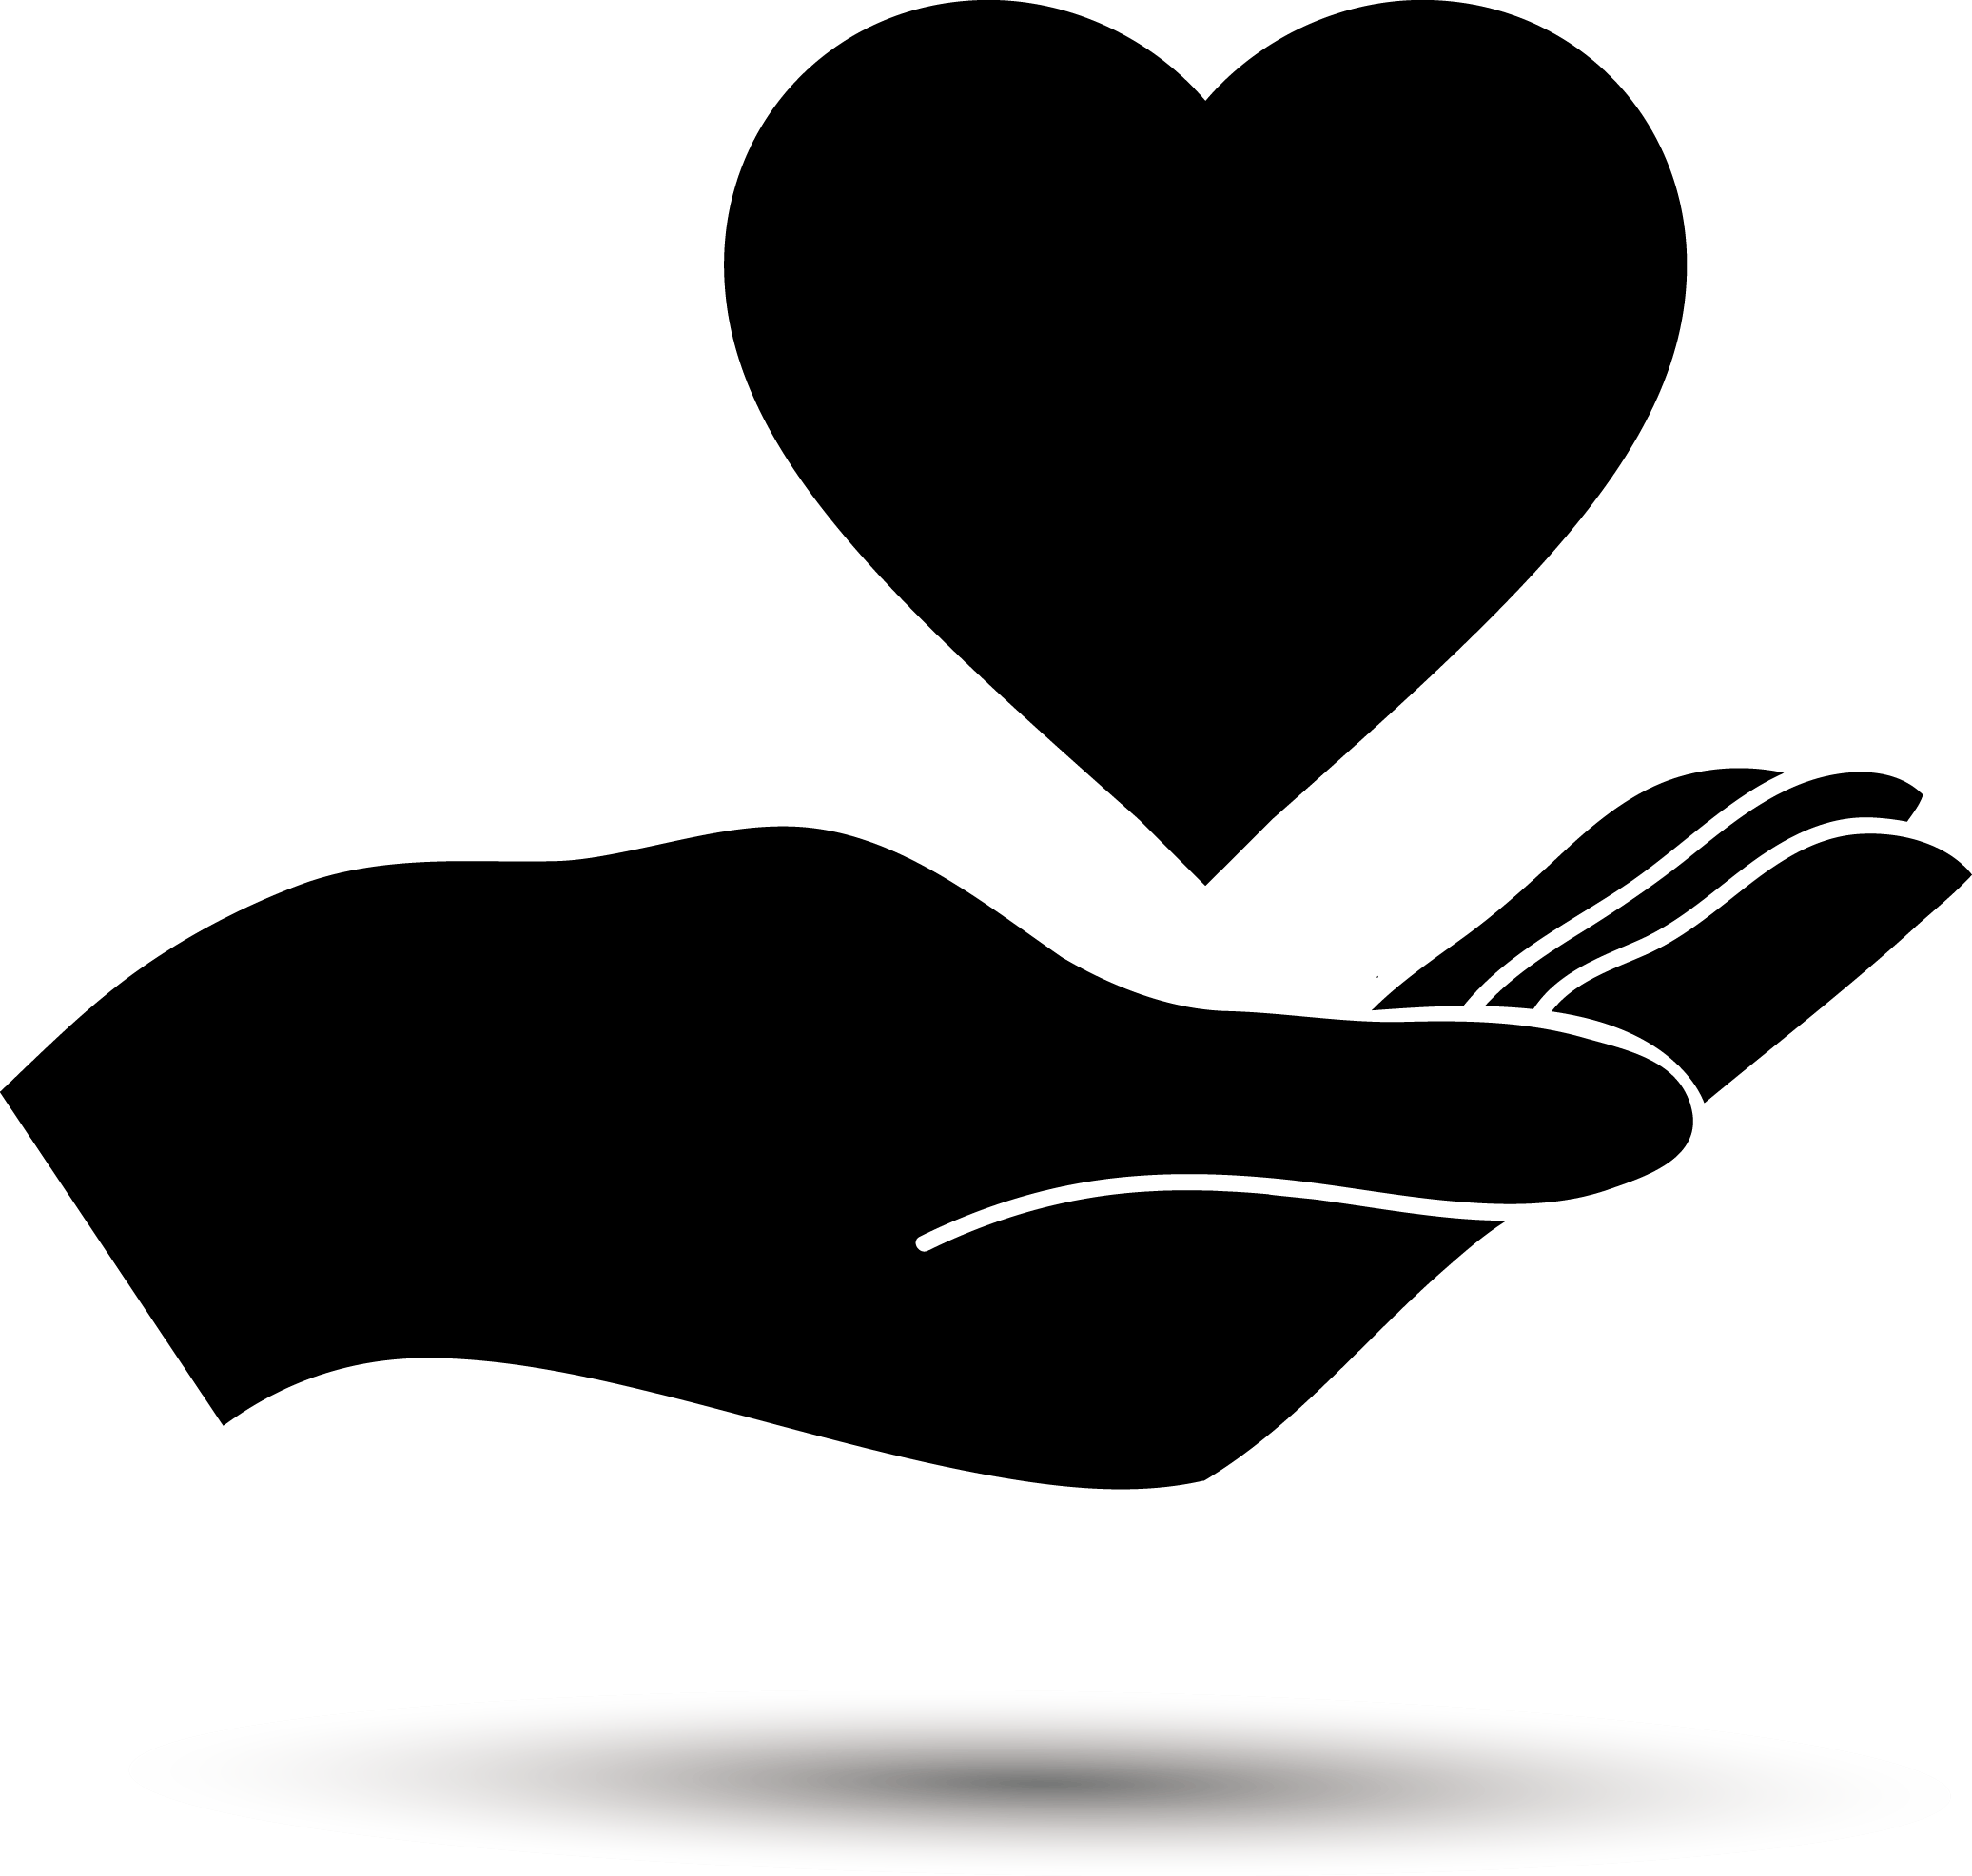 Heart with Hands Logo - Hands holding heart picture freeuse library - RR collections